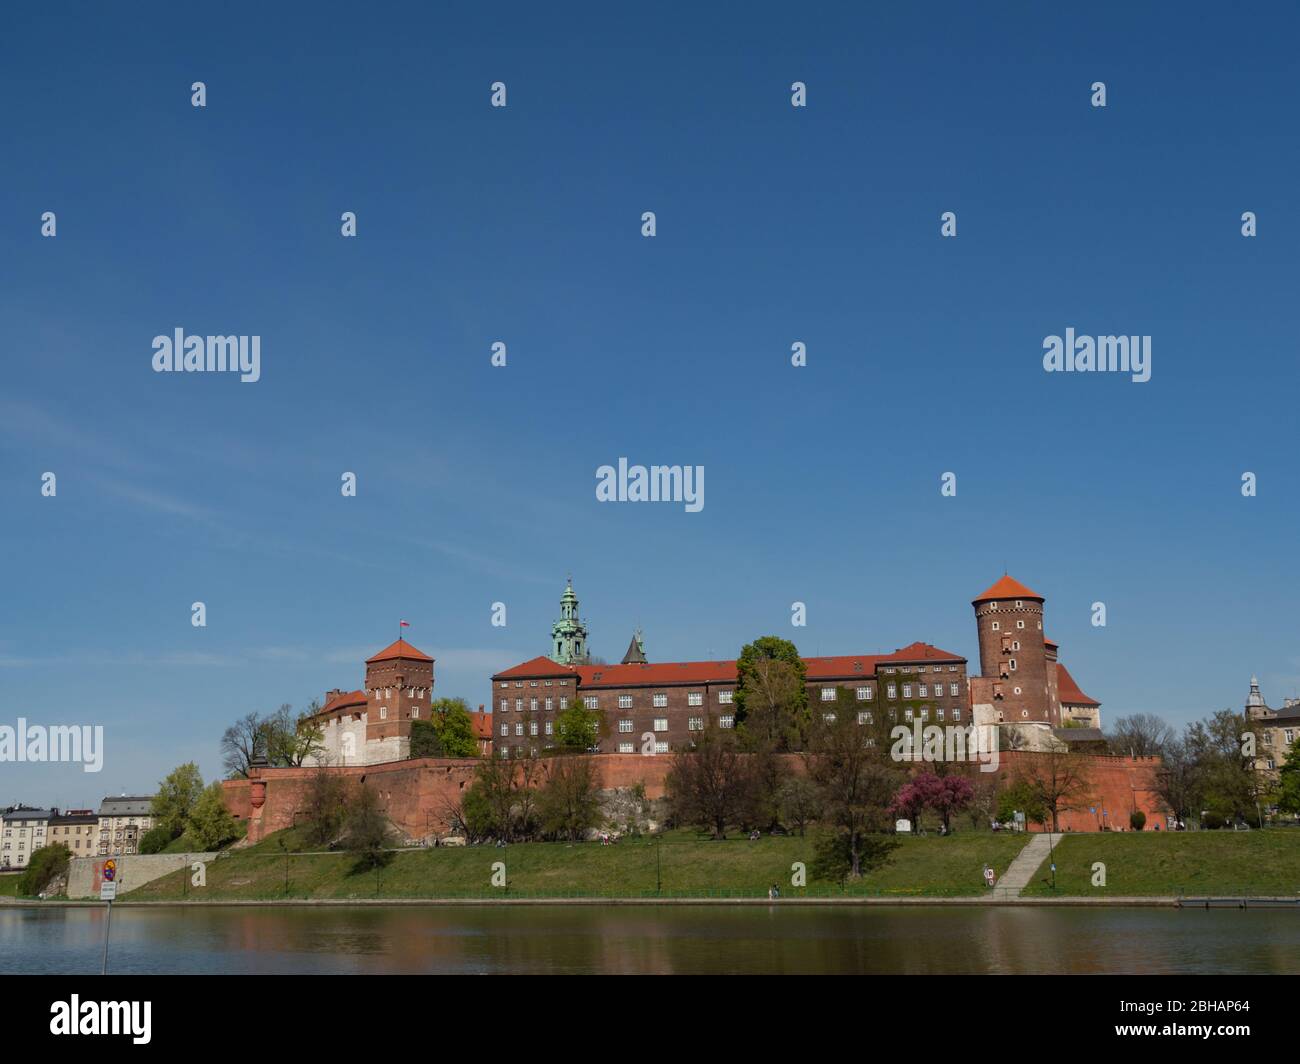 The former Royal residence of Polish monarchy, Wawel Castle, Krakow, Poland. Spring time, view from the Vistula river boulevard.  Negative space fora Stock Photo